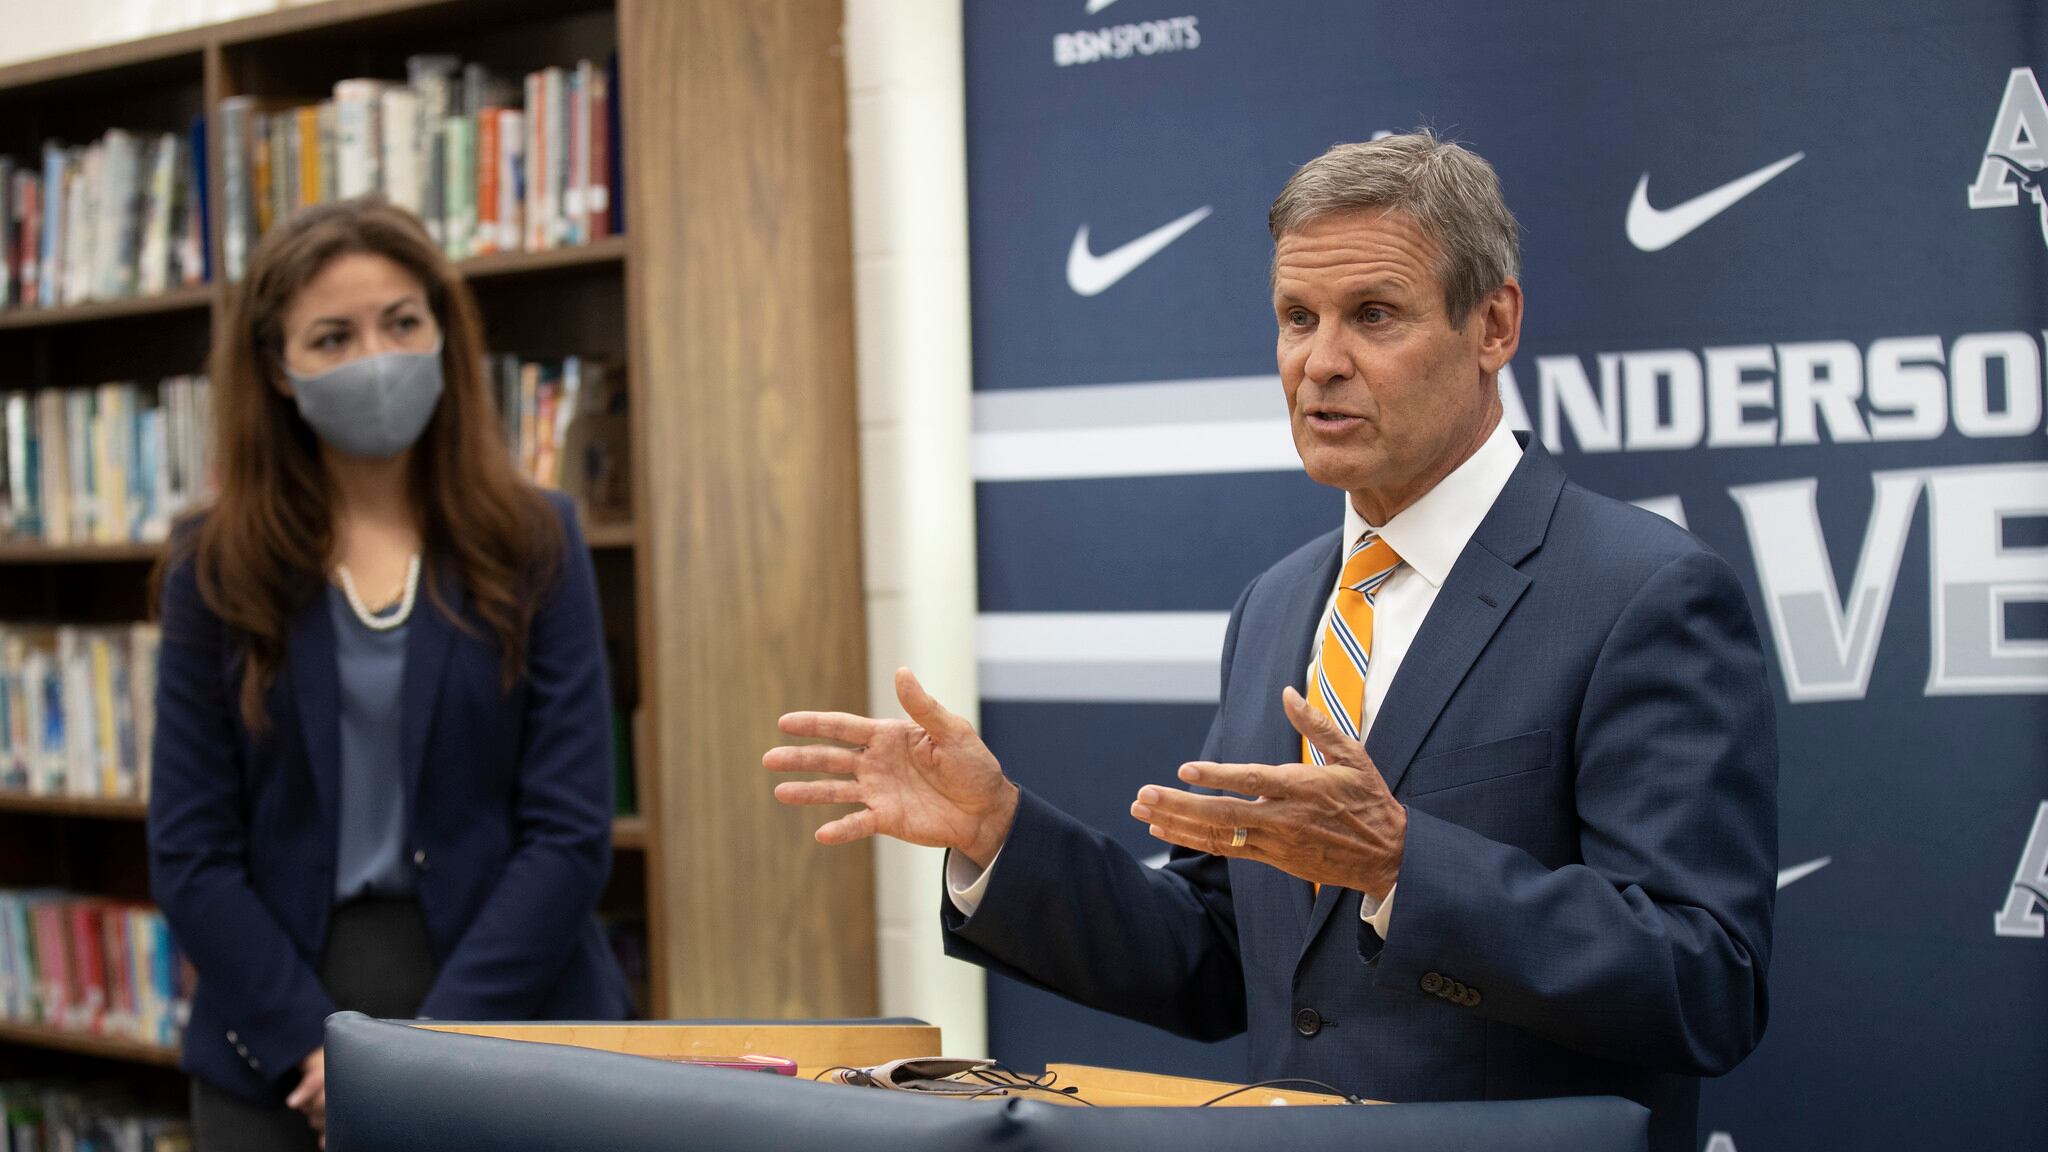 Gov. Bill Lee speaks at a podium while Tennessee Education Commissioner Penny Schwinn looks on